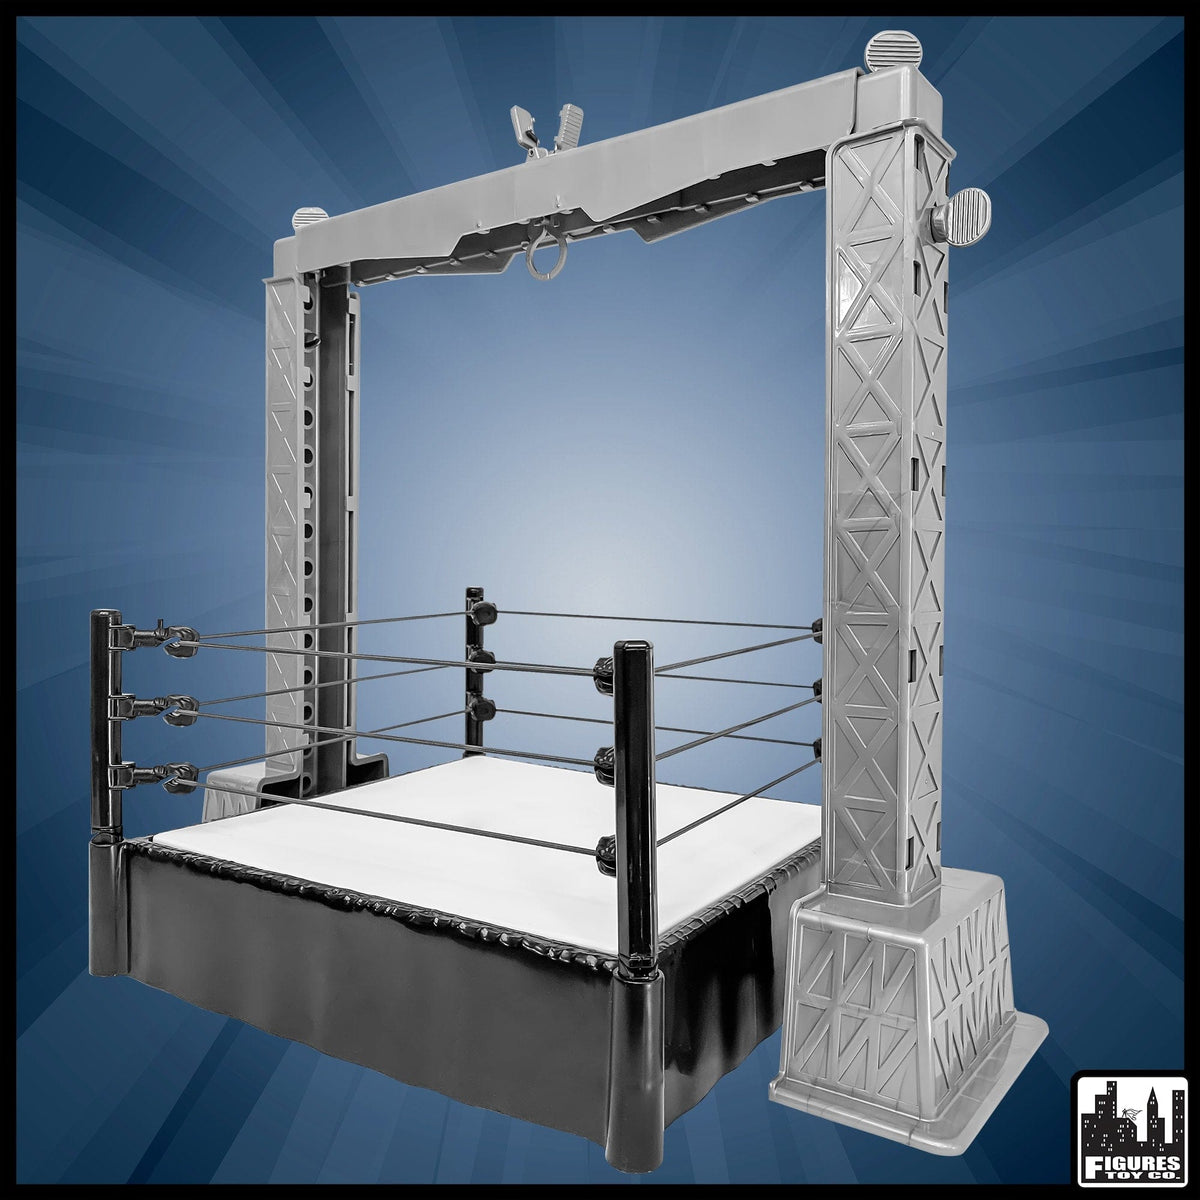 Grab The Gear Adjustable Playset for WWE Wrestling Action Figures